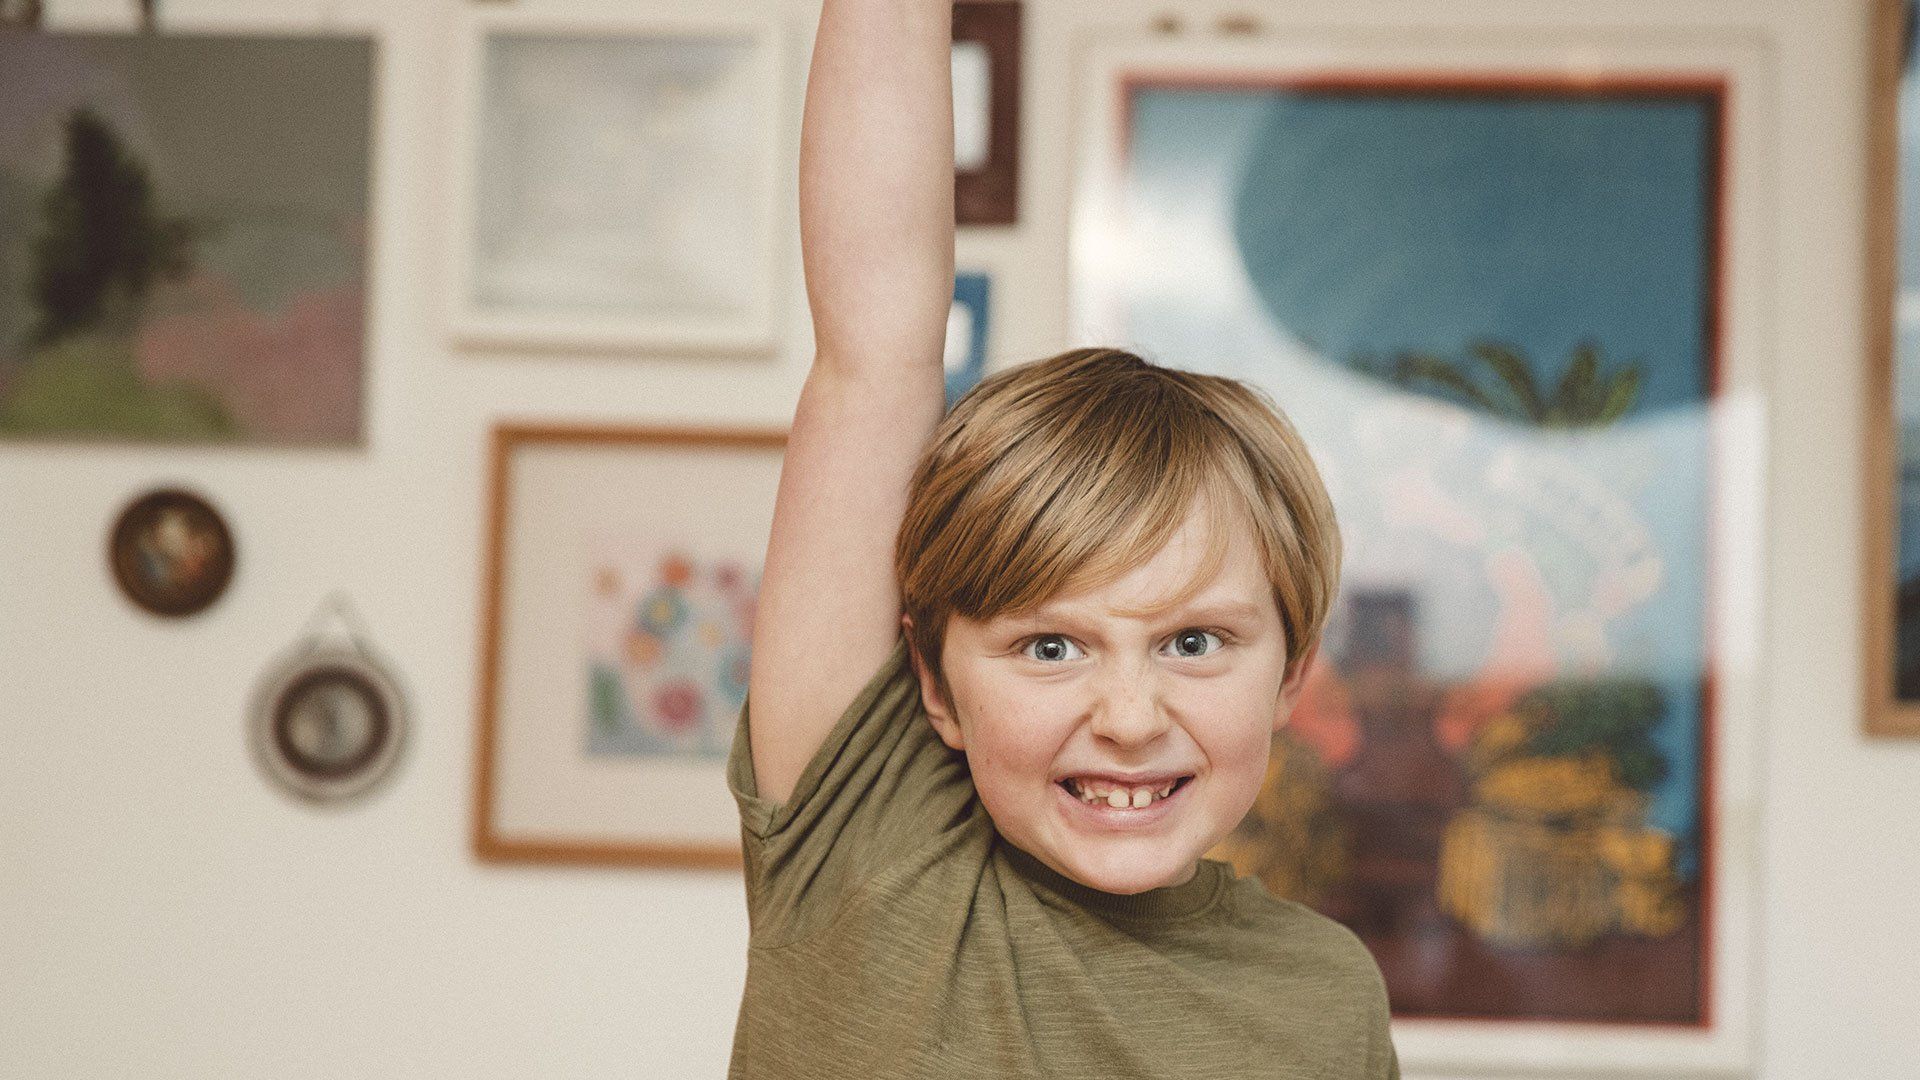 Portrait of a boy with his hand up